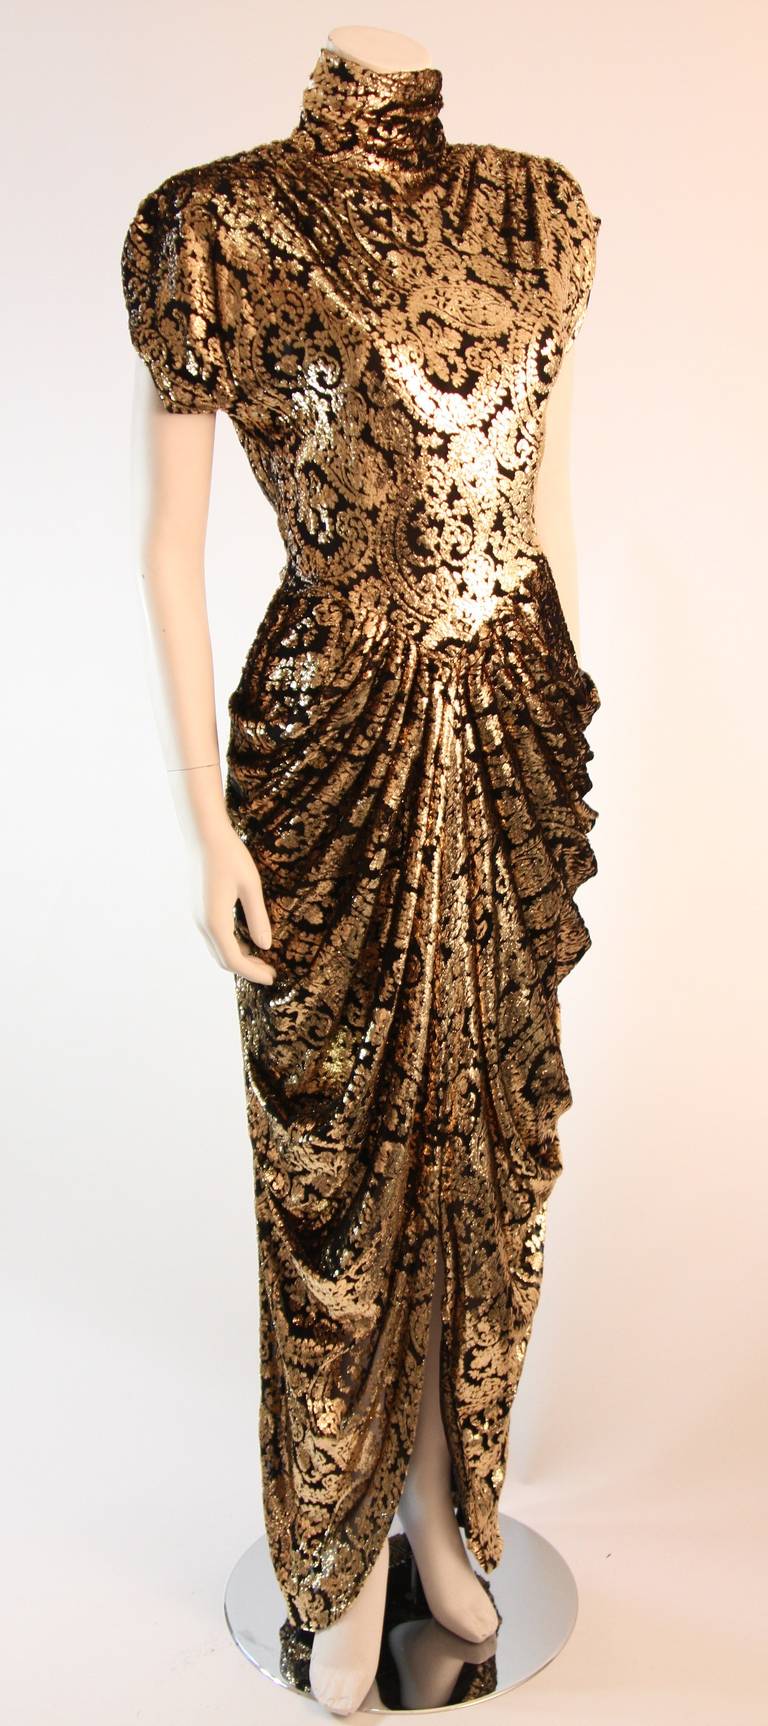 This is a spectacular Vicky Tiel gown. This amazing gown is composed of a fantastic gold and black burnout Panne velvet fabric. The gown features a drop waist, hip draping, shoulder pads, and high neck. The back is equally as flattering as the front